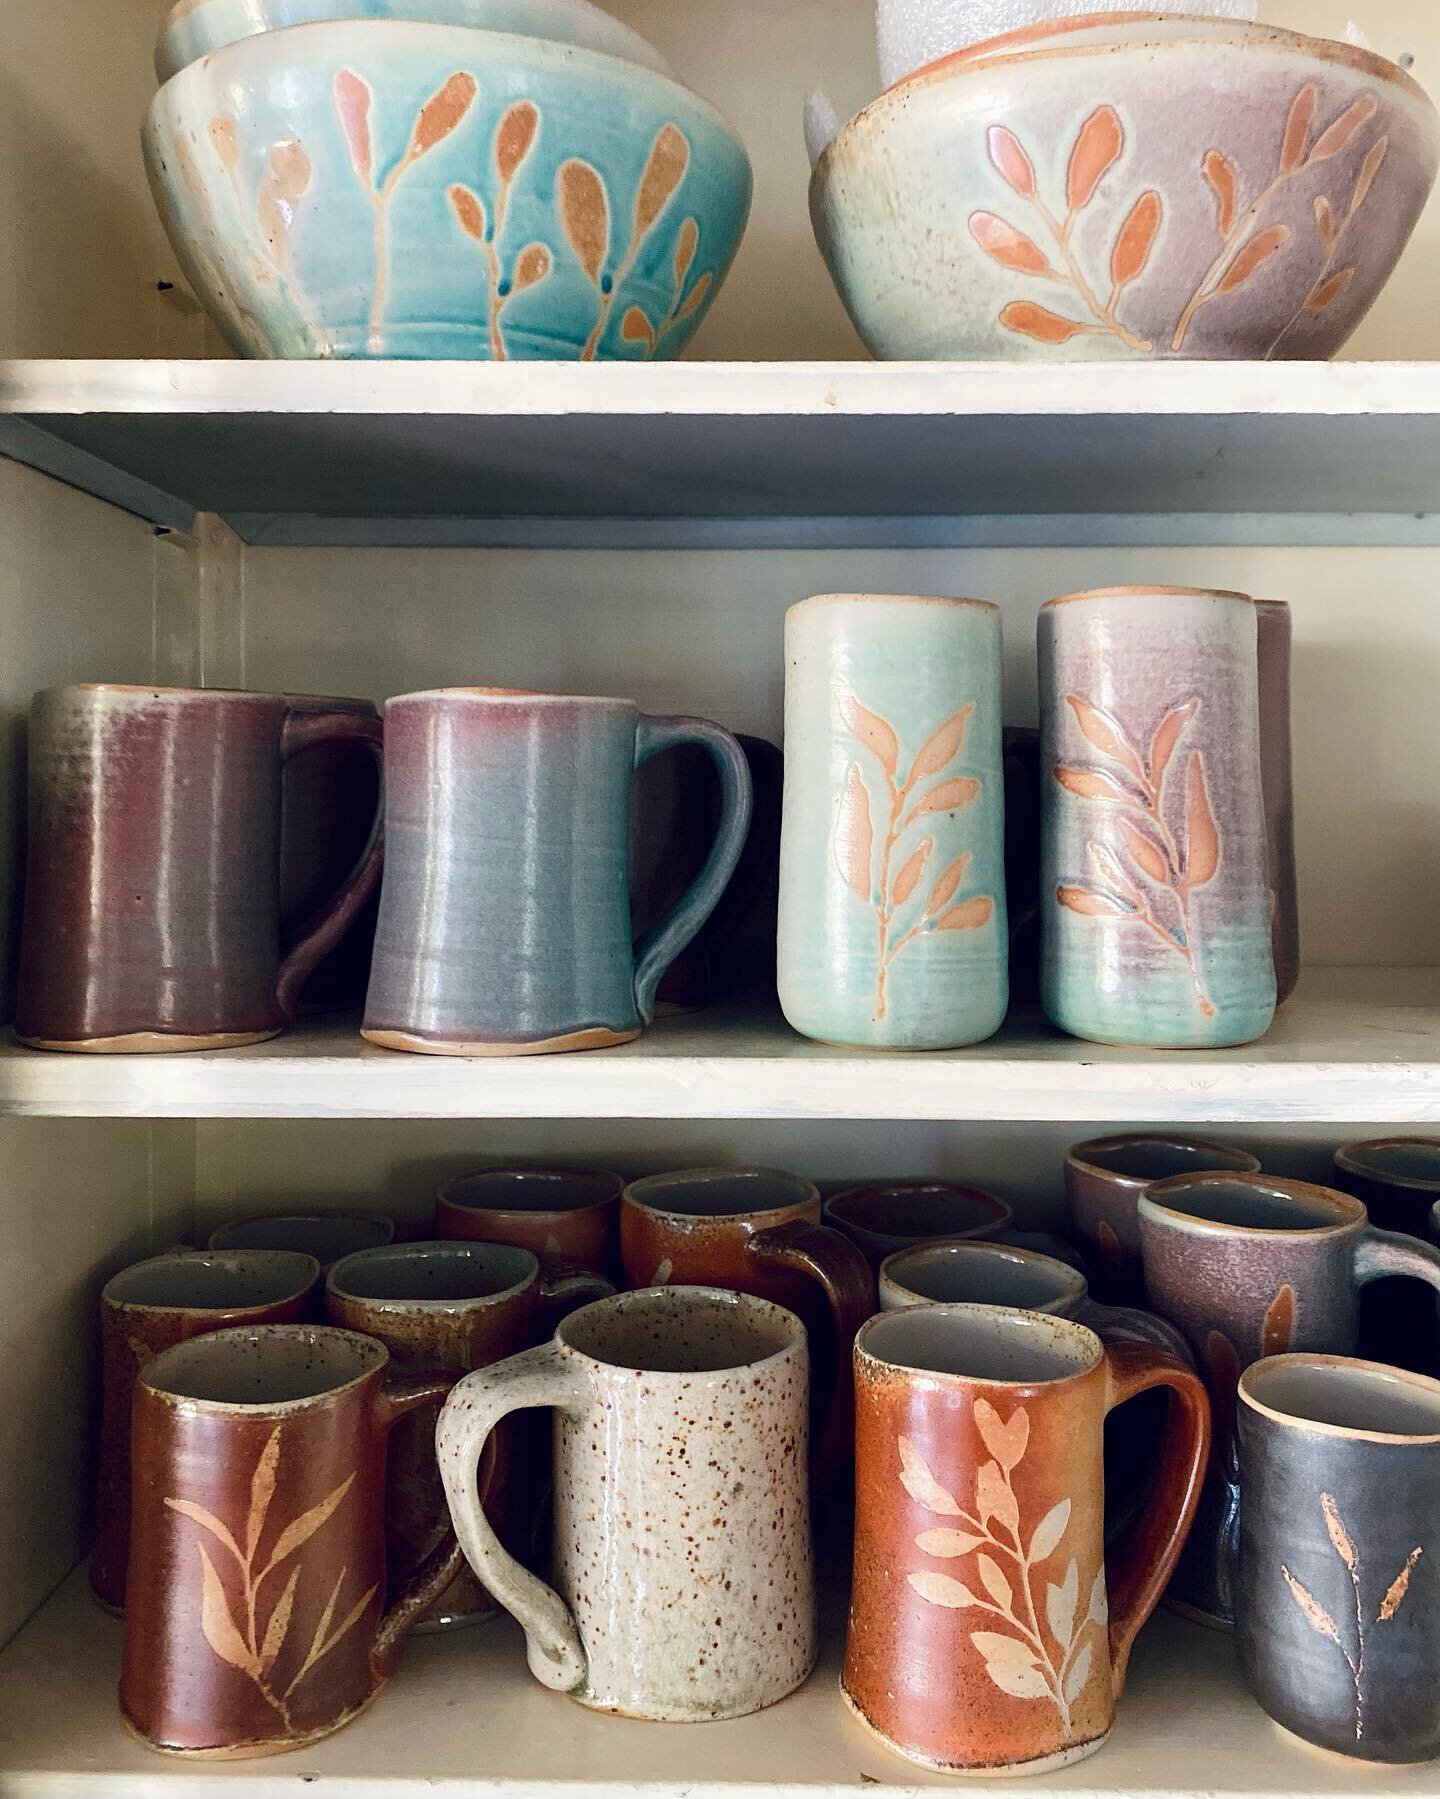 Filling the shelves with new pots, plus building my new studio (yes, you guessed right!) makes a girl&rsquo;s cup feel pretty darn full. ✨🙏🏼💛

I&rsquo;m hoping to have a late Fall shop update with new work from three different kilns I fired over t